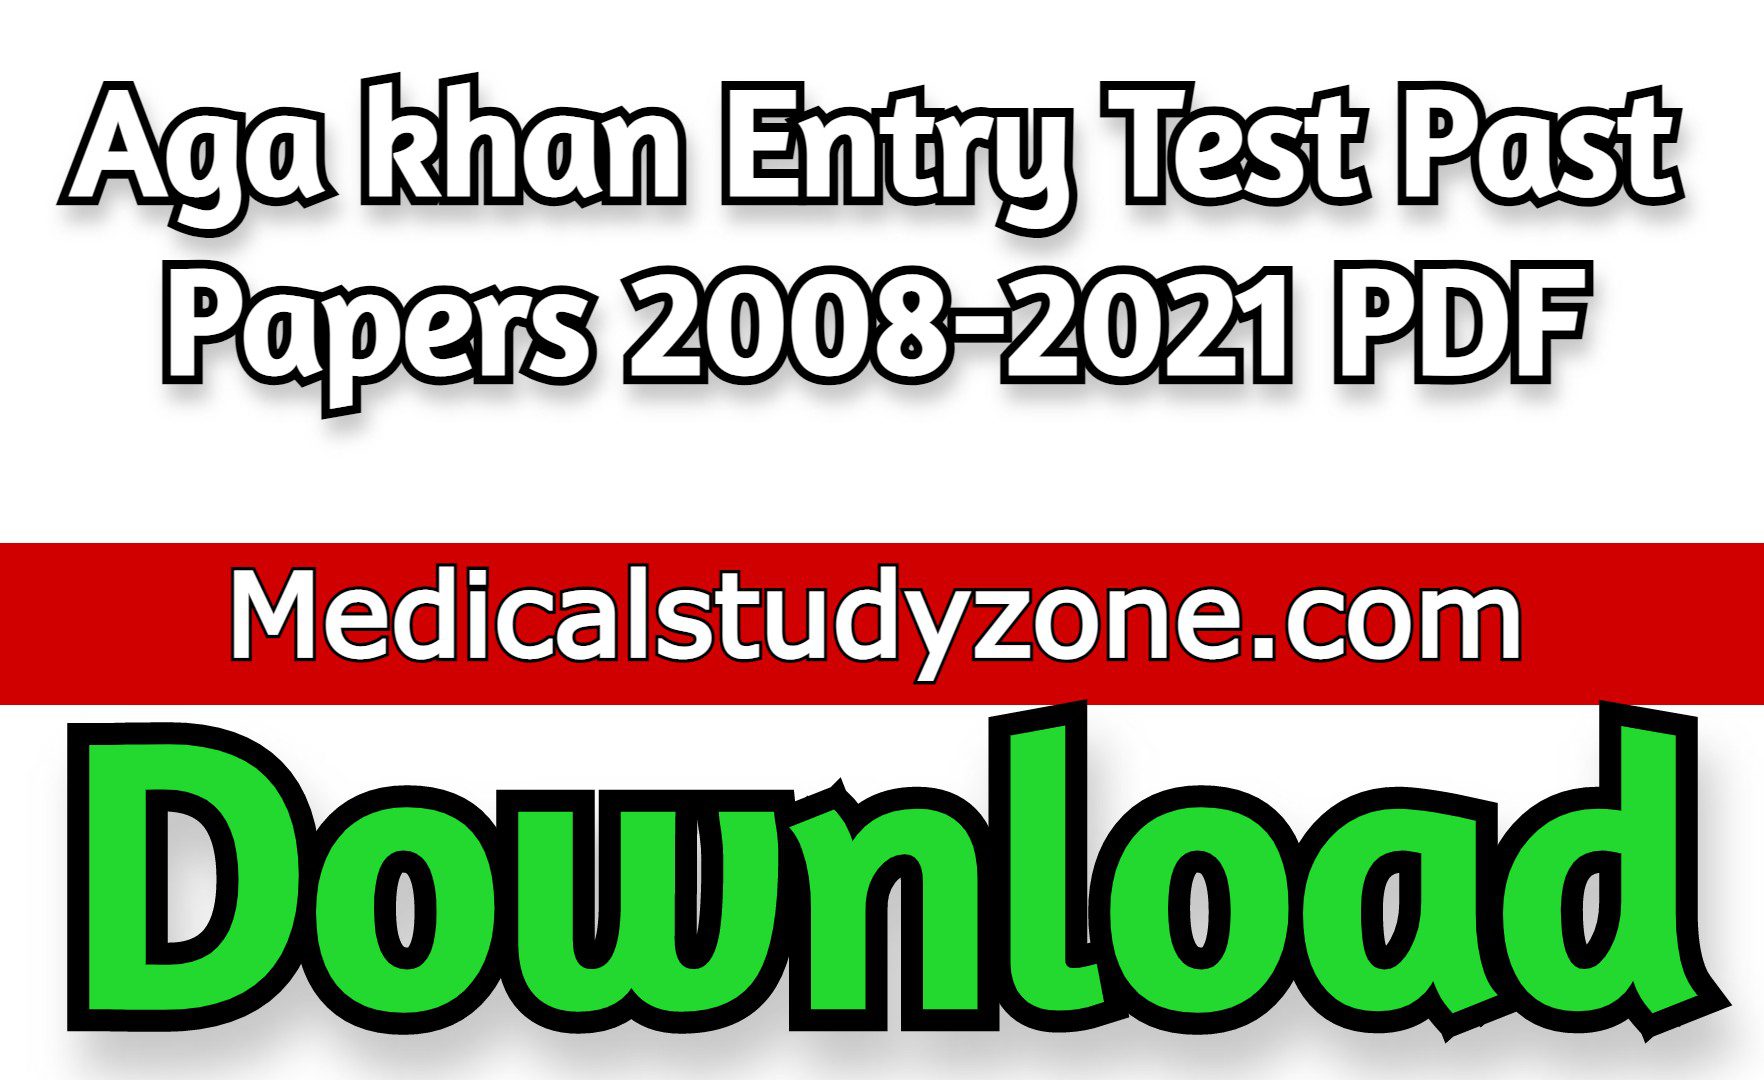 Aga khan Entry Test Past Papers 2008-2021 PDF Free Download